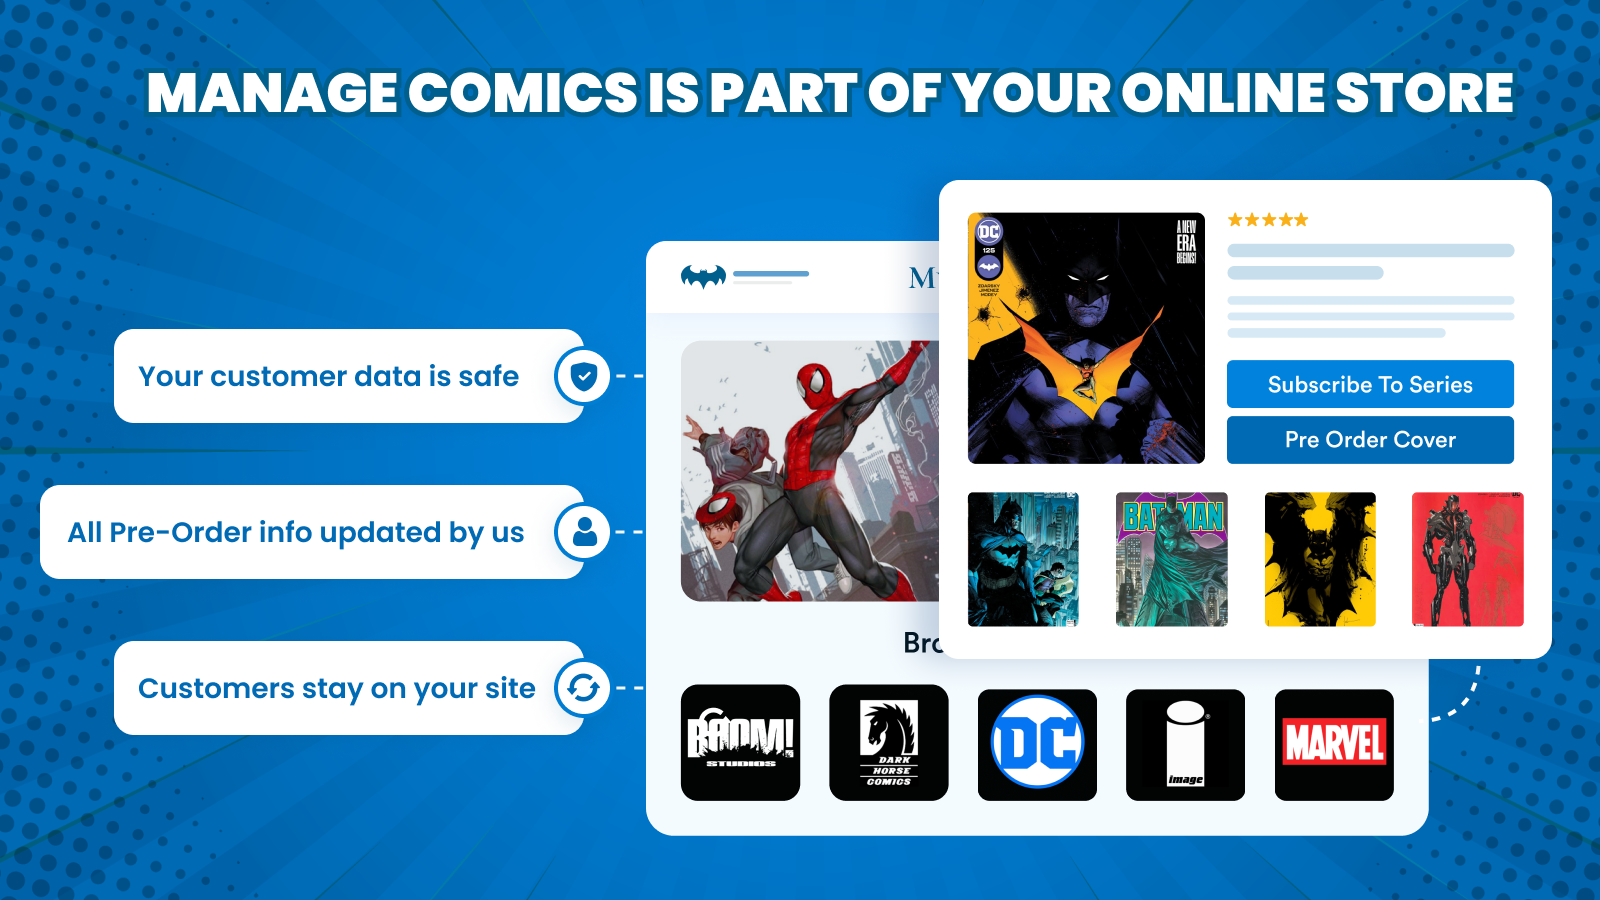 Manage Comics is part of your online store.